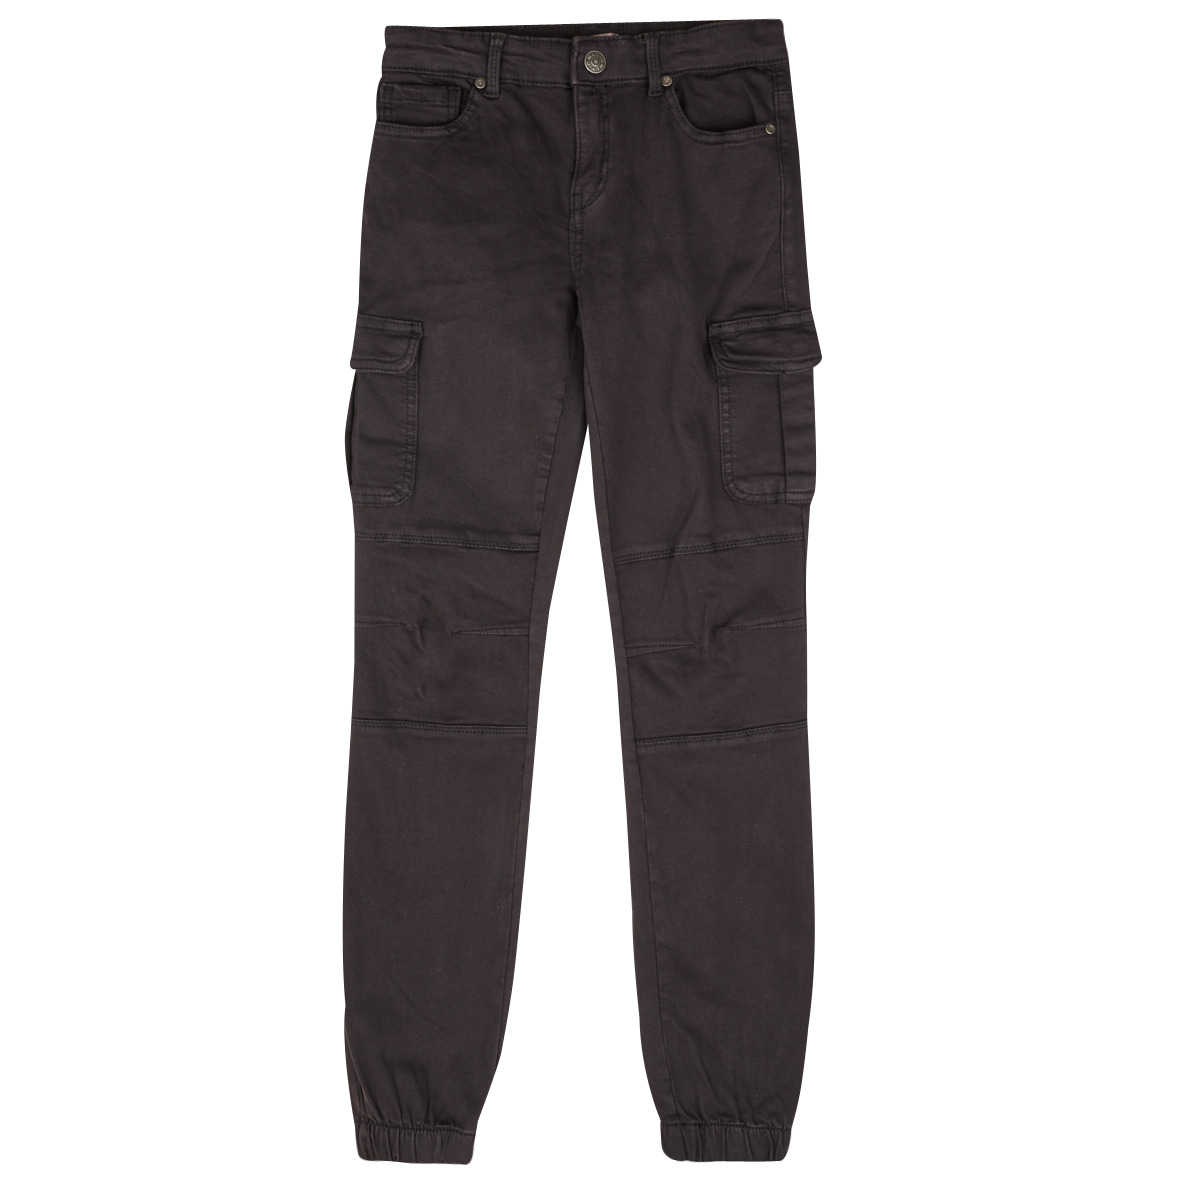 CARGO REG NOOS Cargo £ - Delivery LIFE KOGMISSOURI PNT Black Clothing Only Child ! trousers Free with Rubbersole.co.uk -